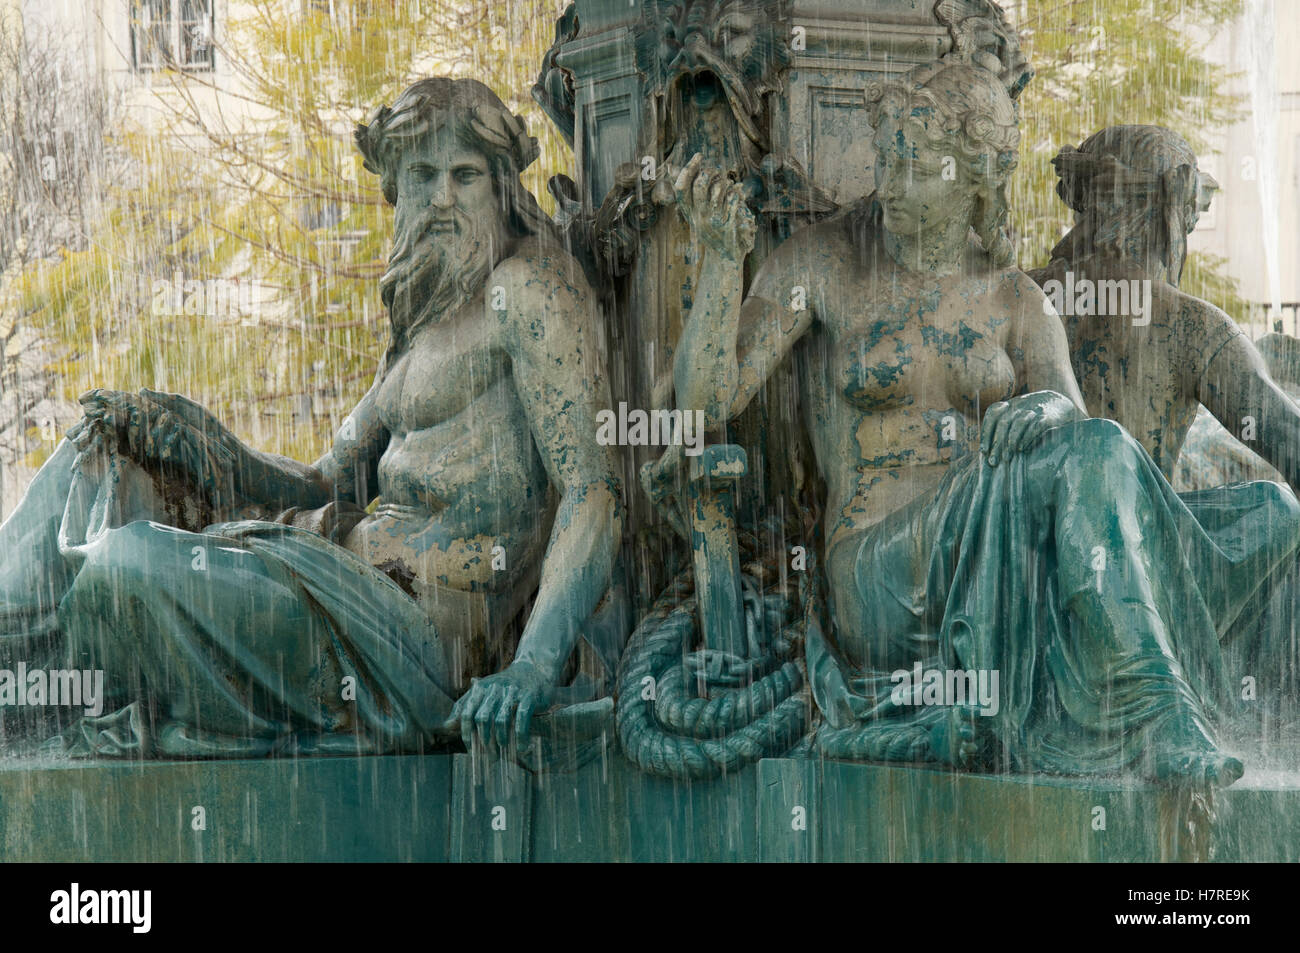 Neoclassical fountain. Bronze statues of nude classical mythological figures adorn the fountains in the Praça Dom Pedro IV. Rossio, Lisbon, Portugal. Stock Photo